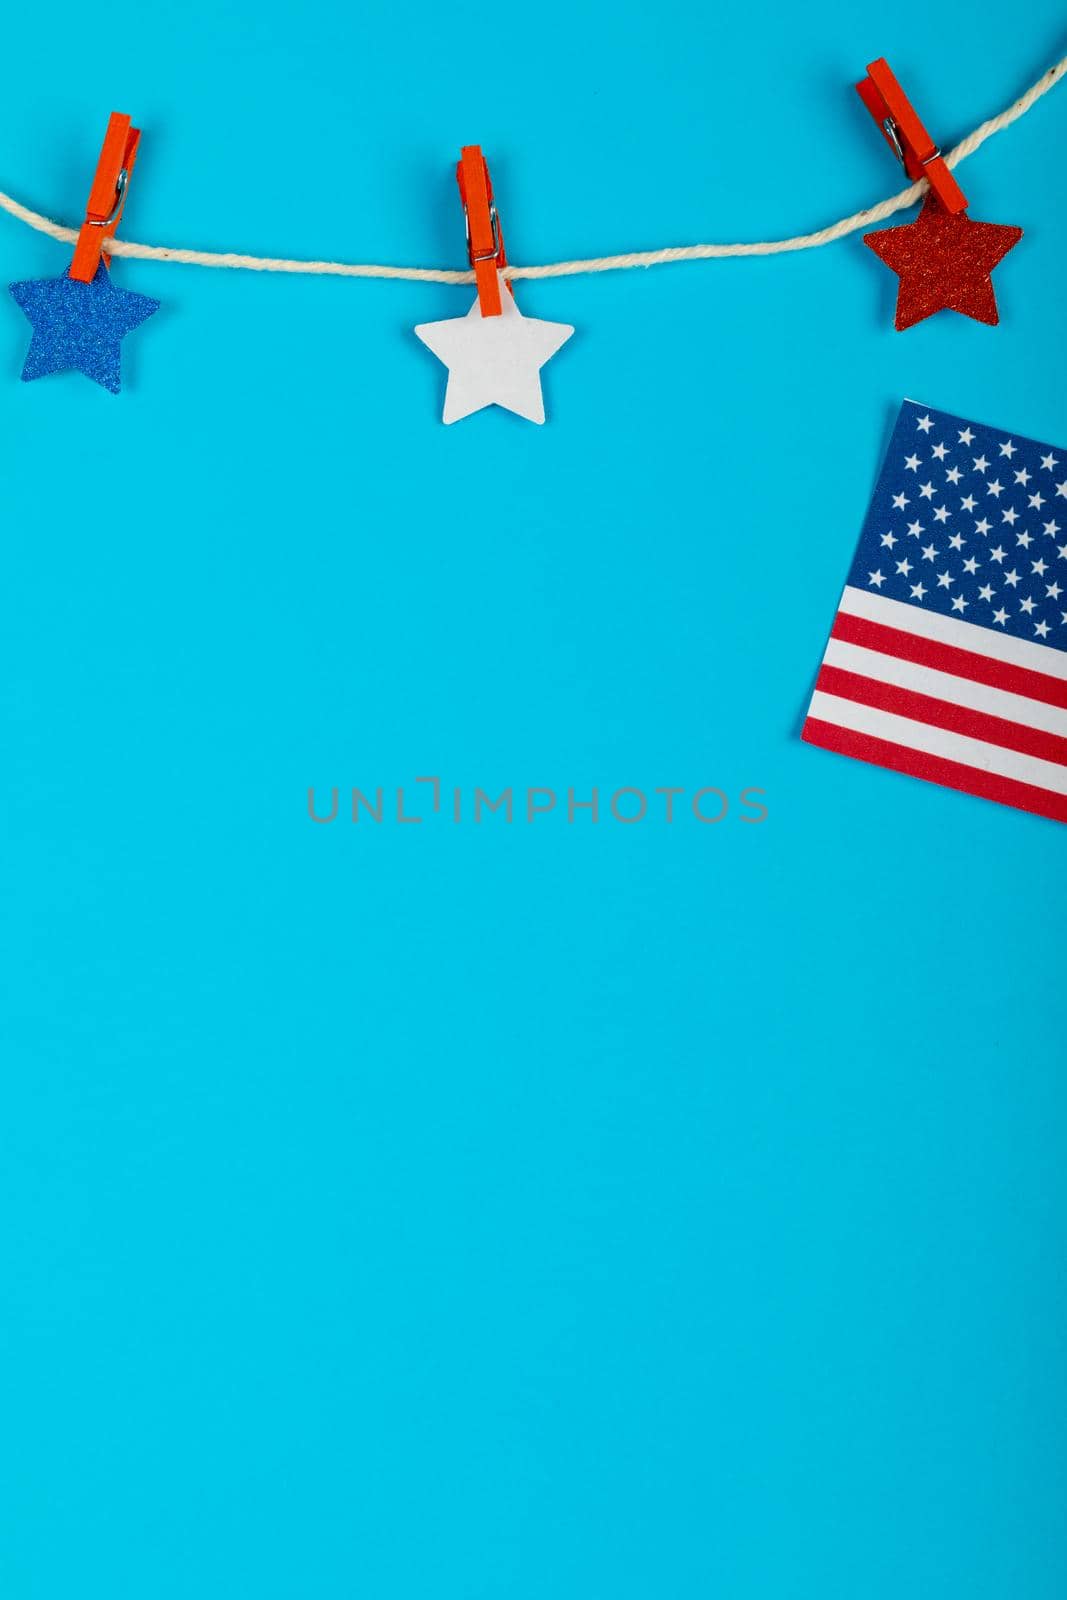 Clothespins holding star shapes on string by usa flag with copy space on blue background by Wavebreakmedia